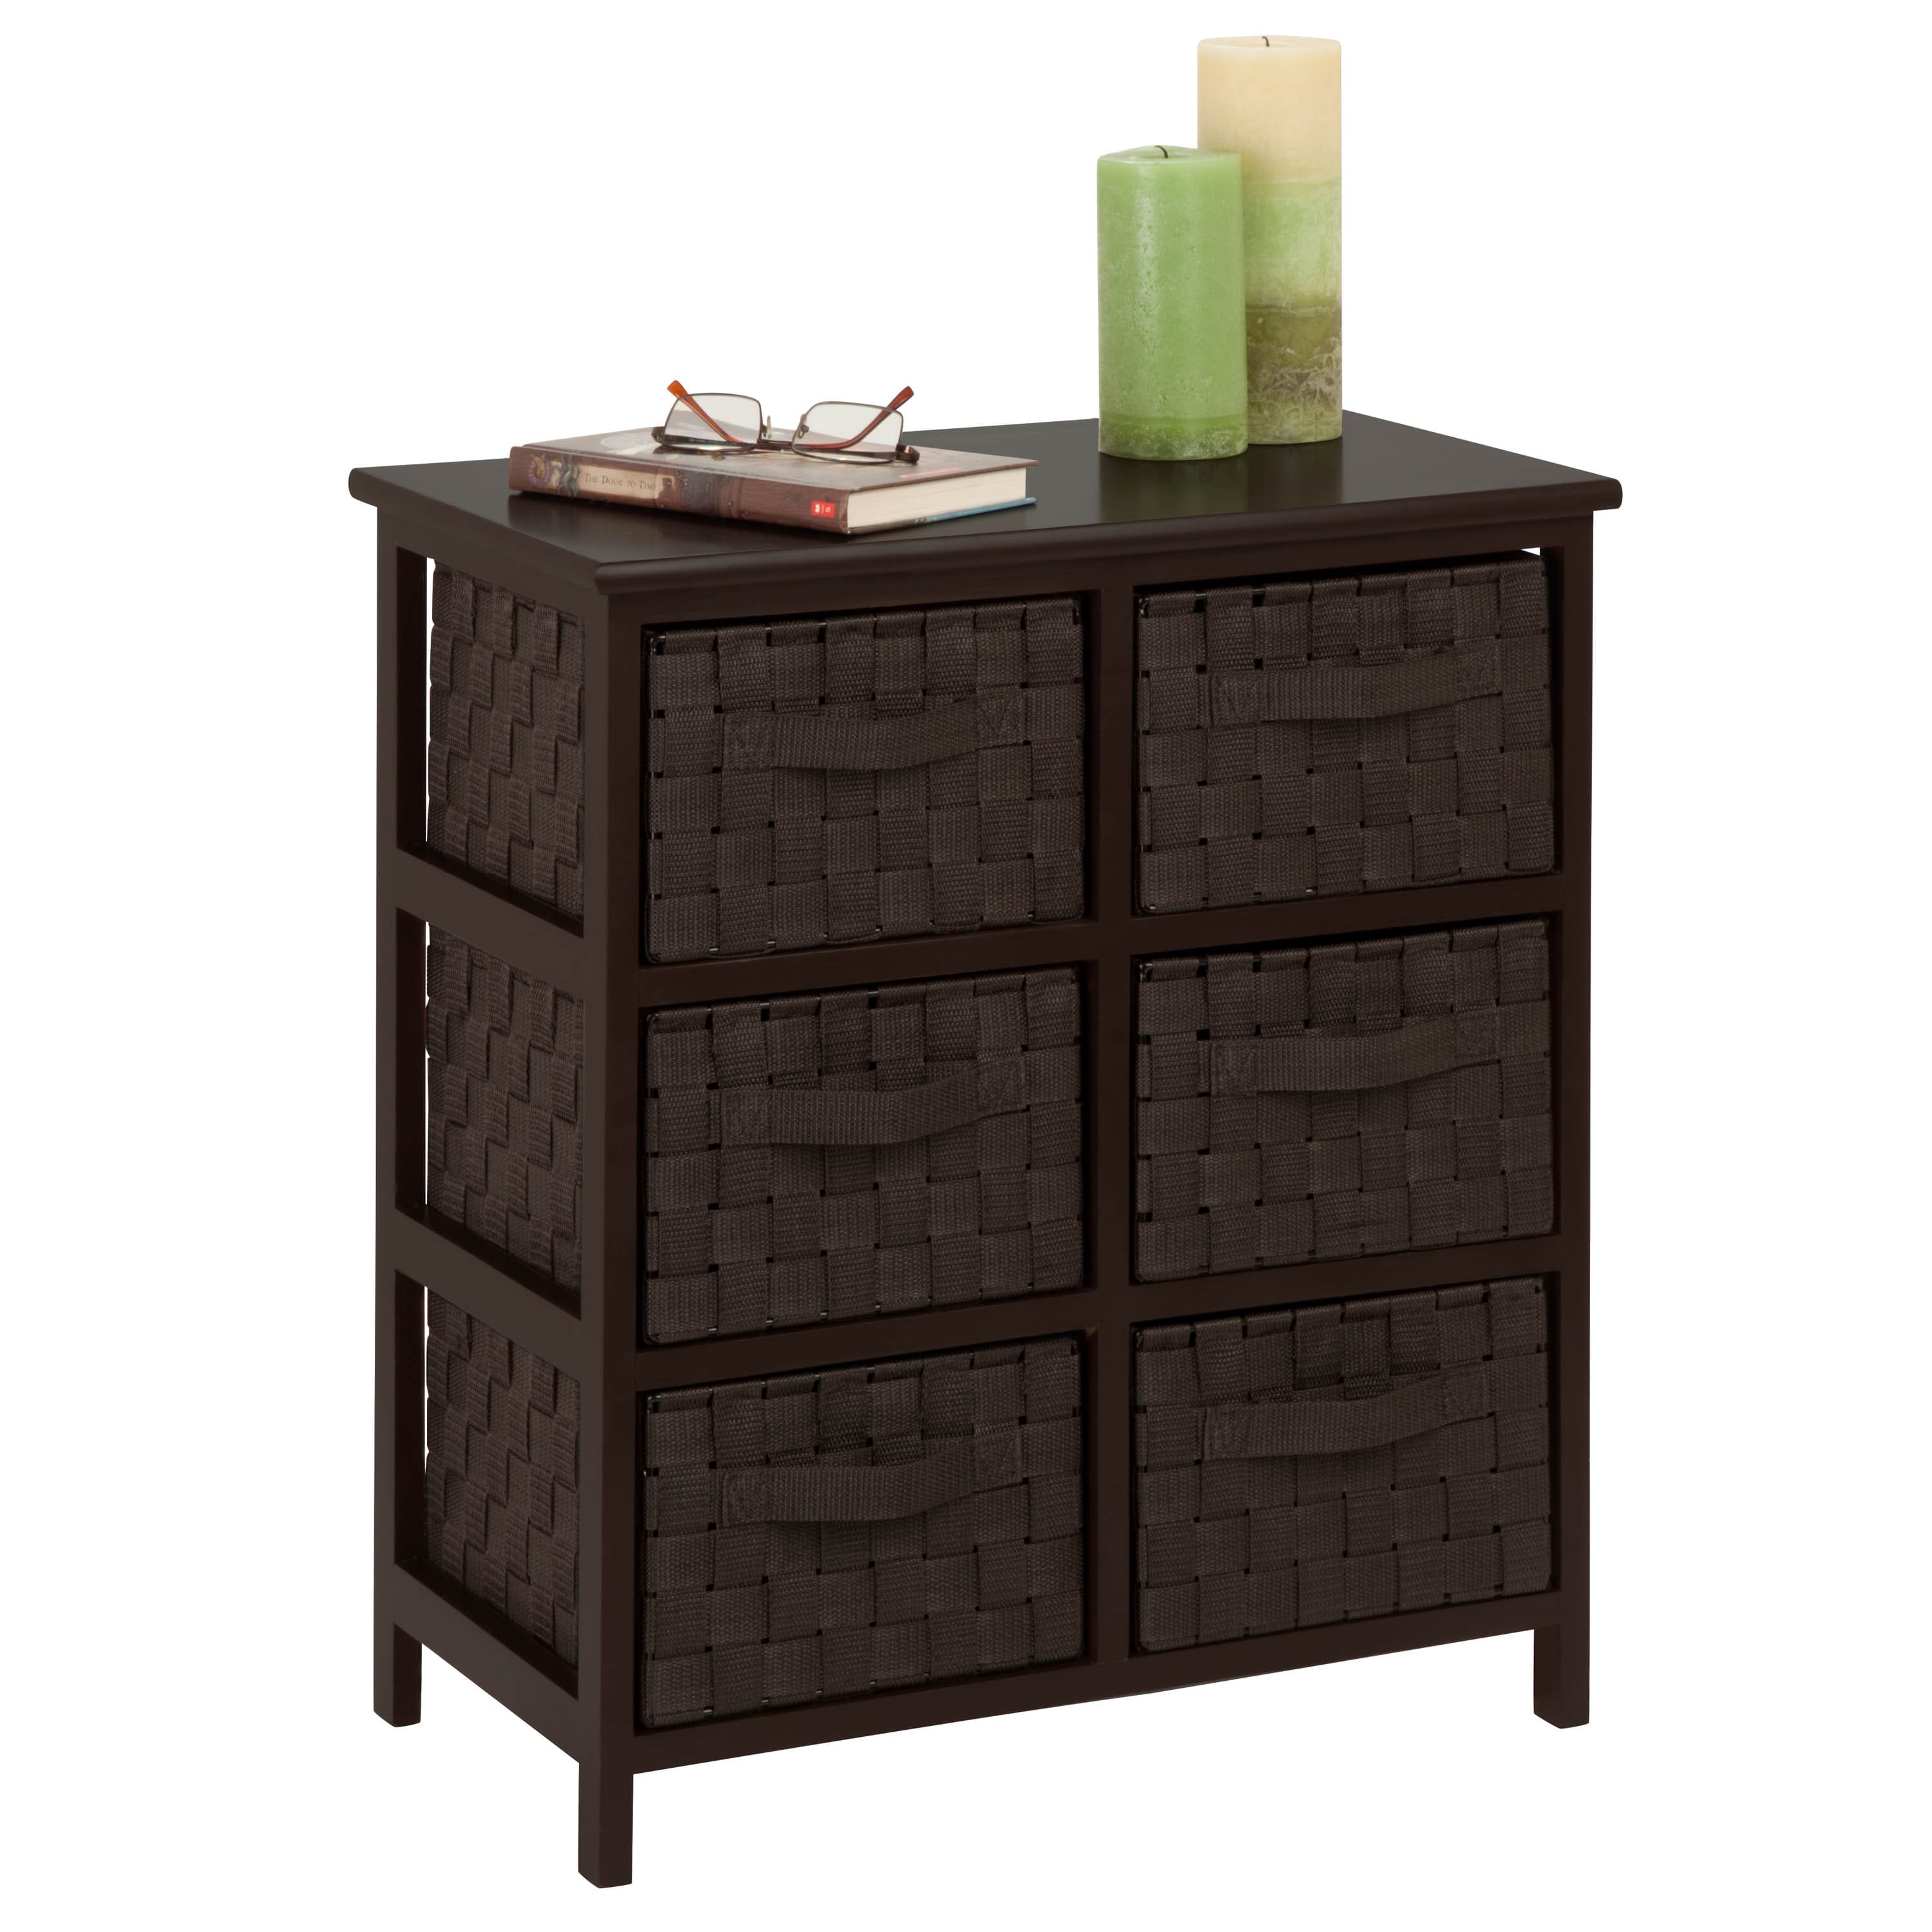 6 Pack: Honey Can Do Black 6 Drawer Woven Strap Storage Chest